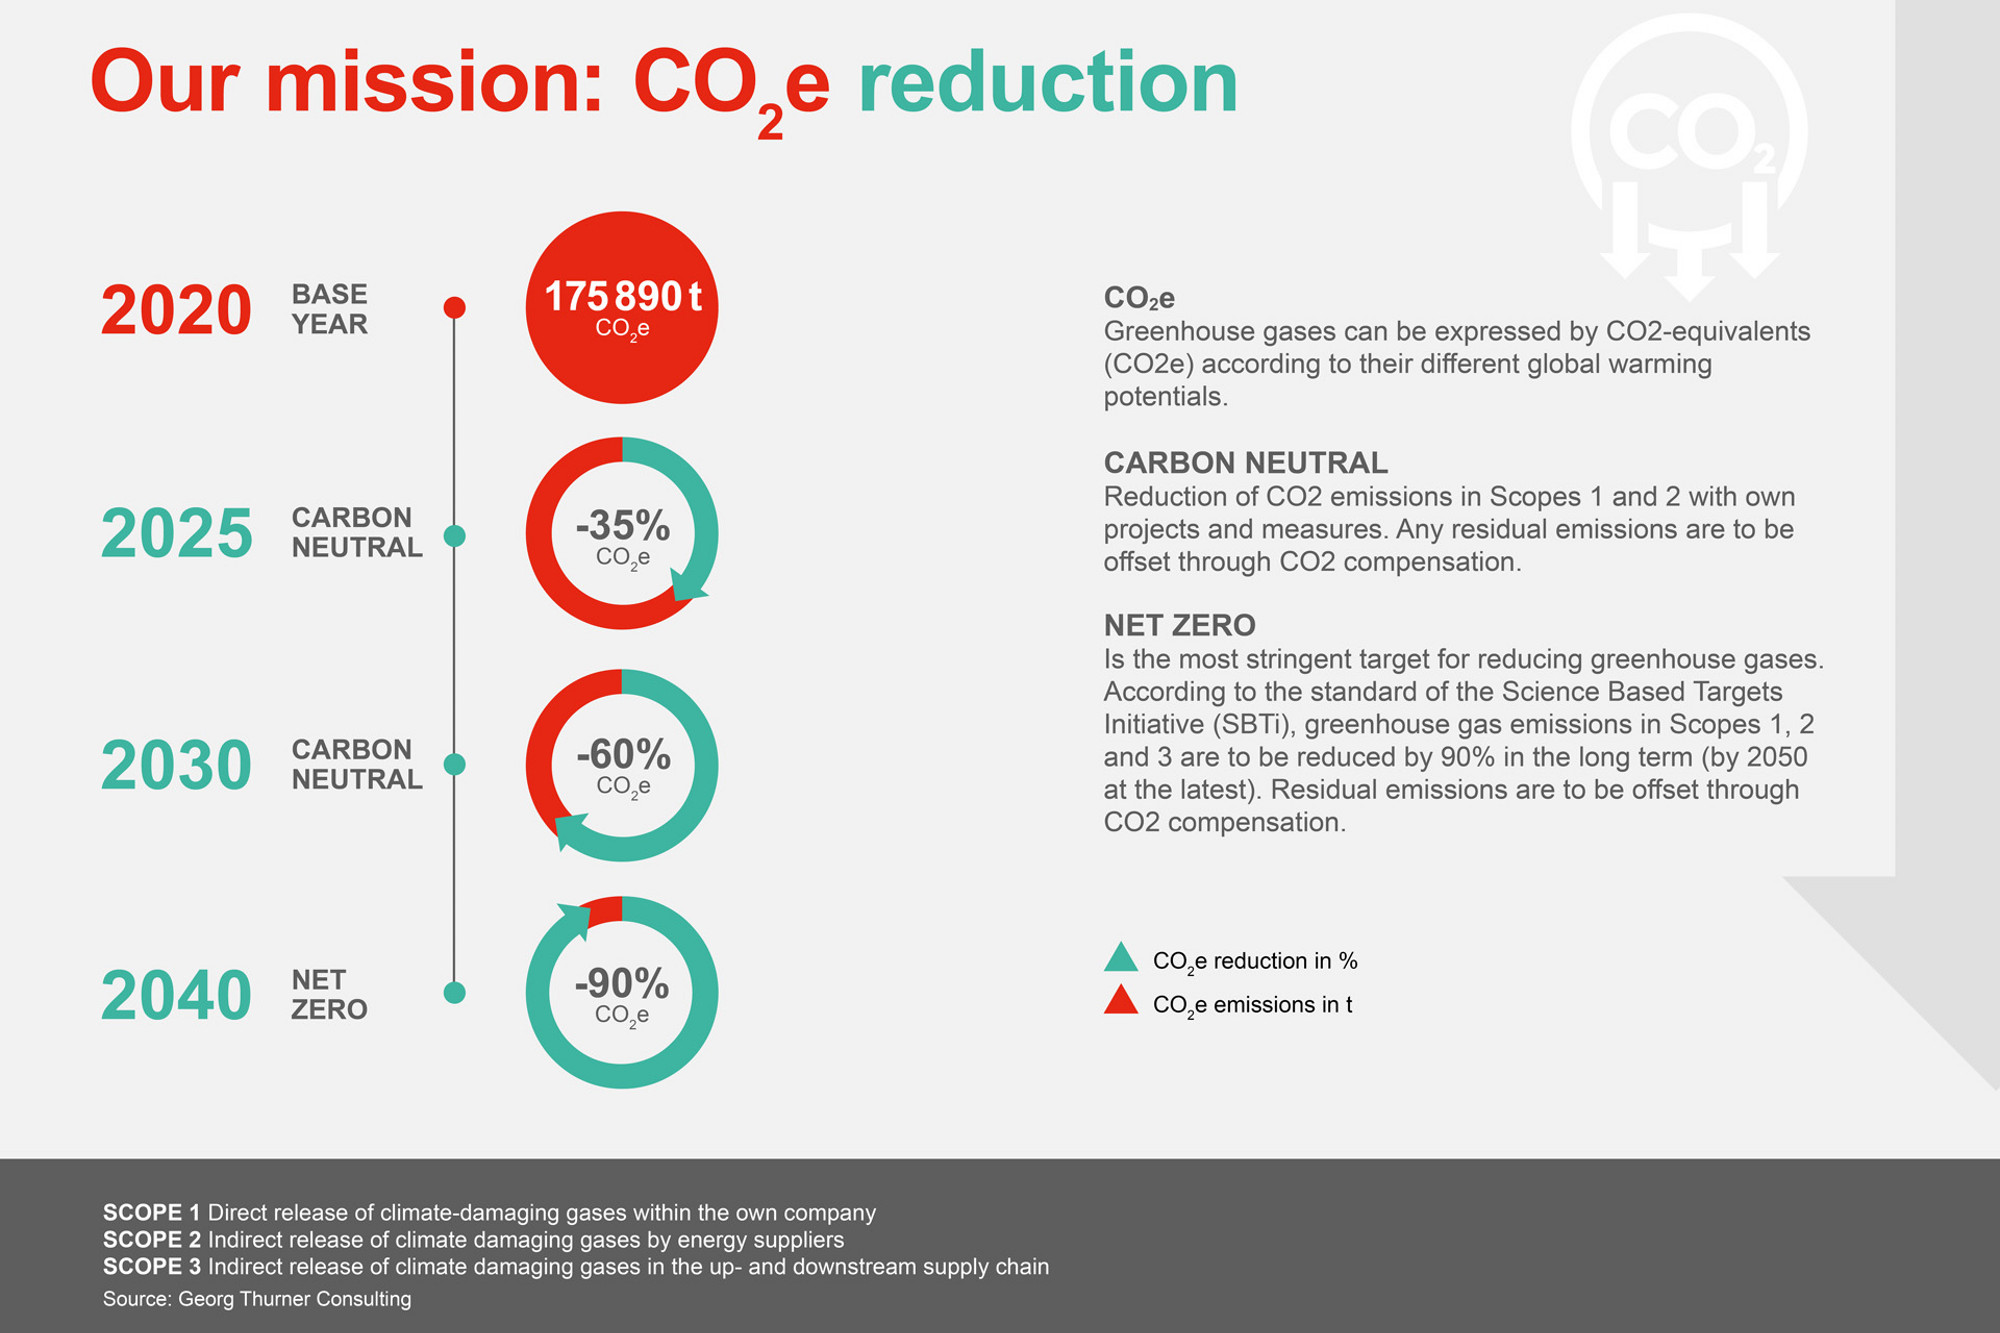 Carbon neutral by 2025